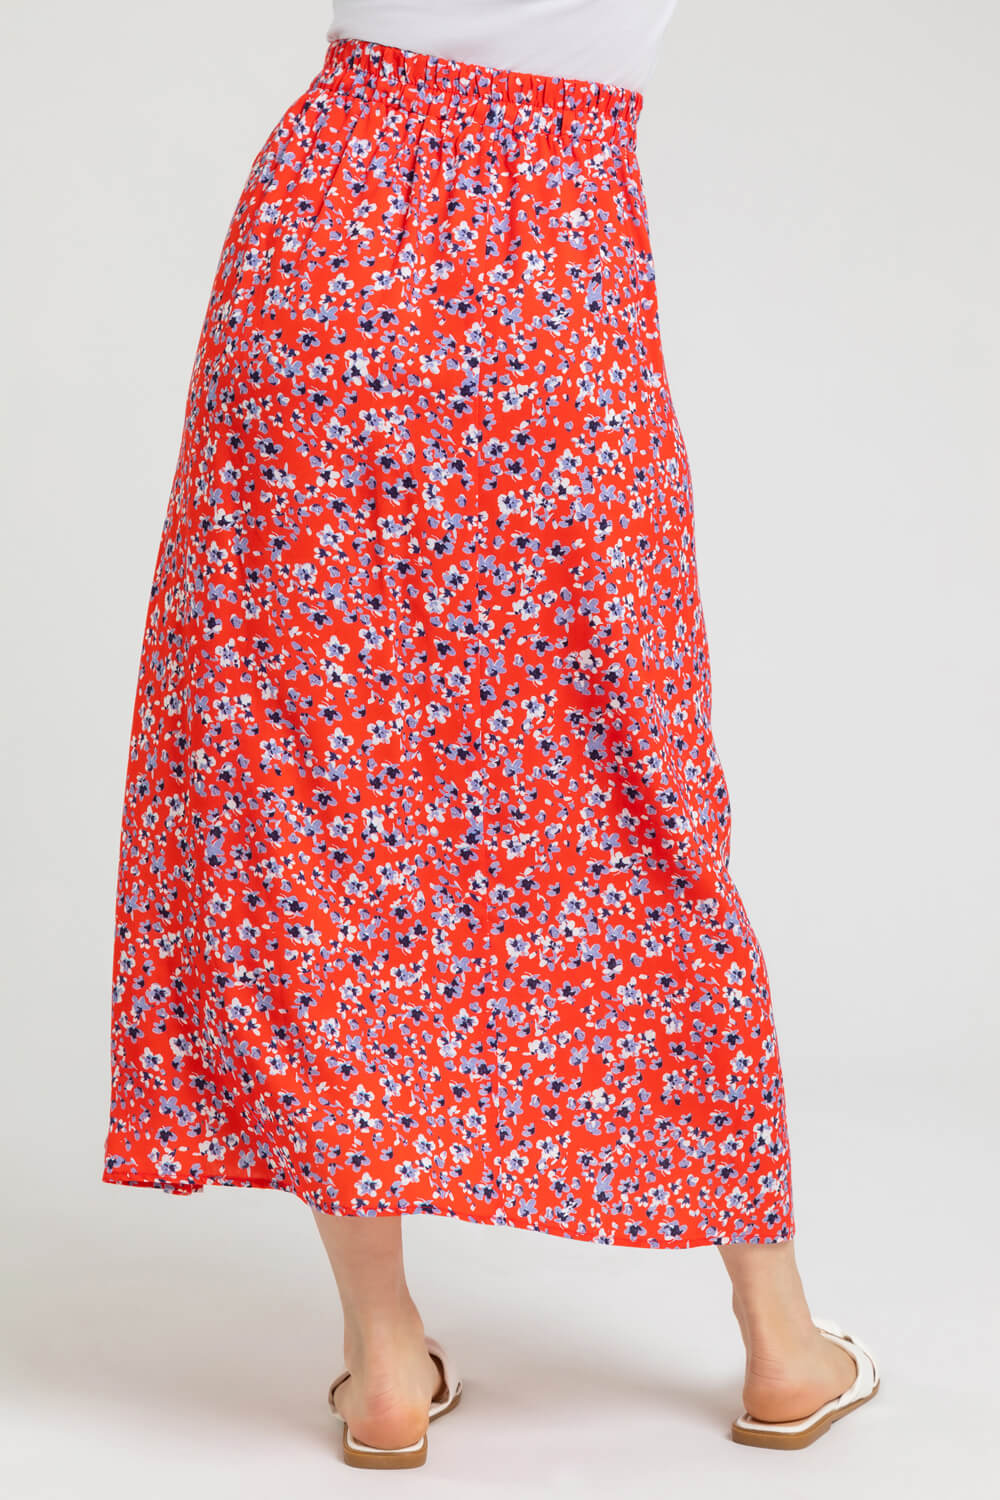 Red Petite Ditsy Floral A-Line Skirt, Image 3 of 4